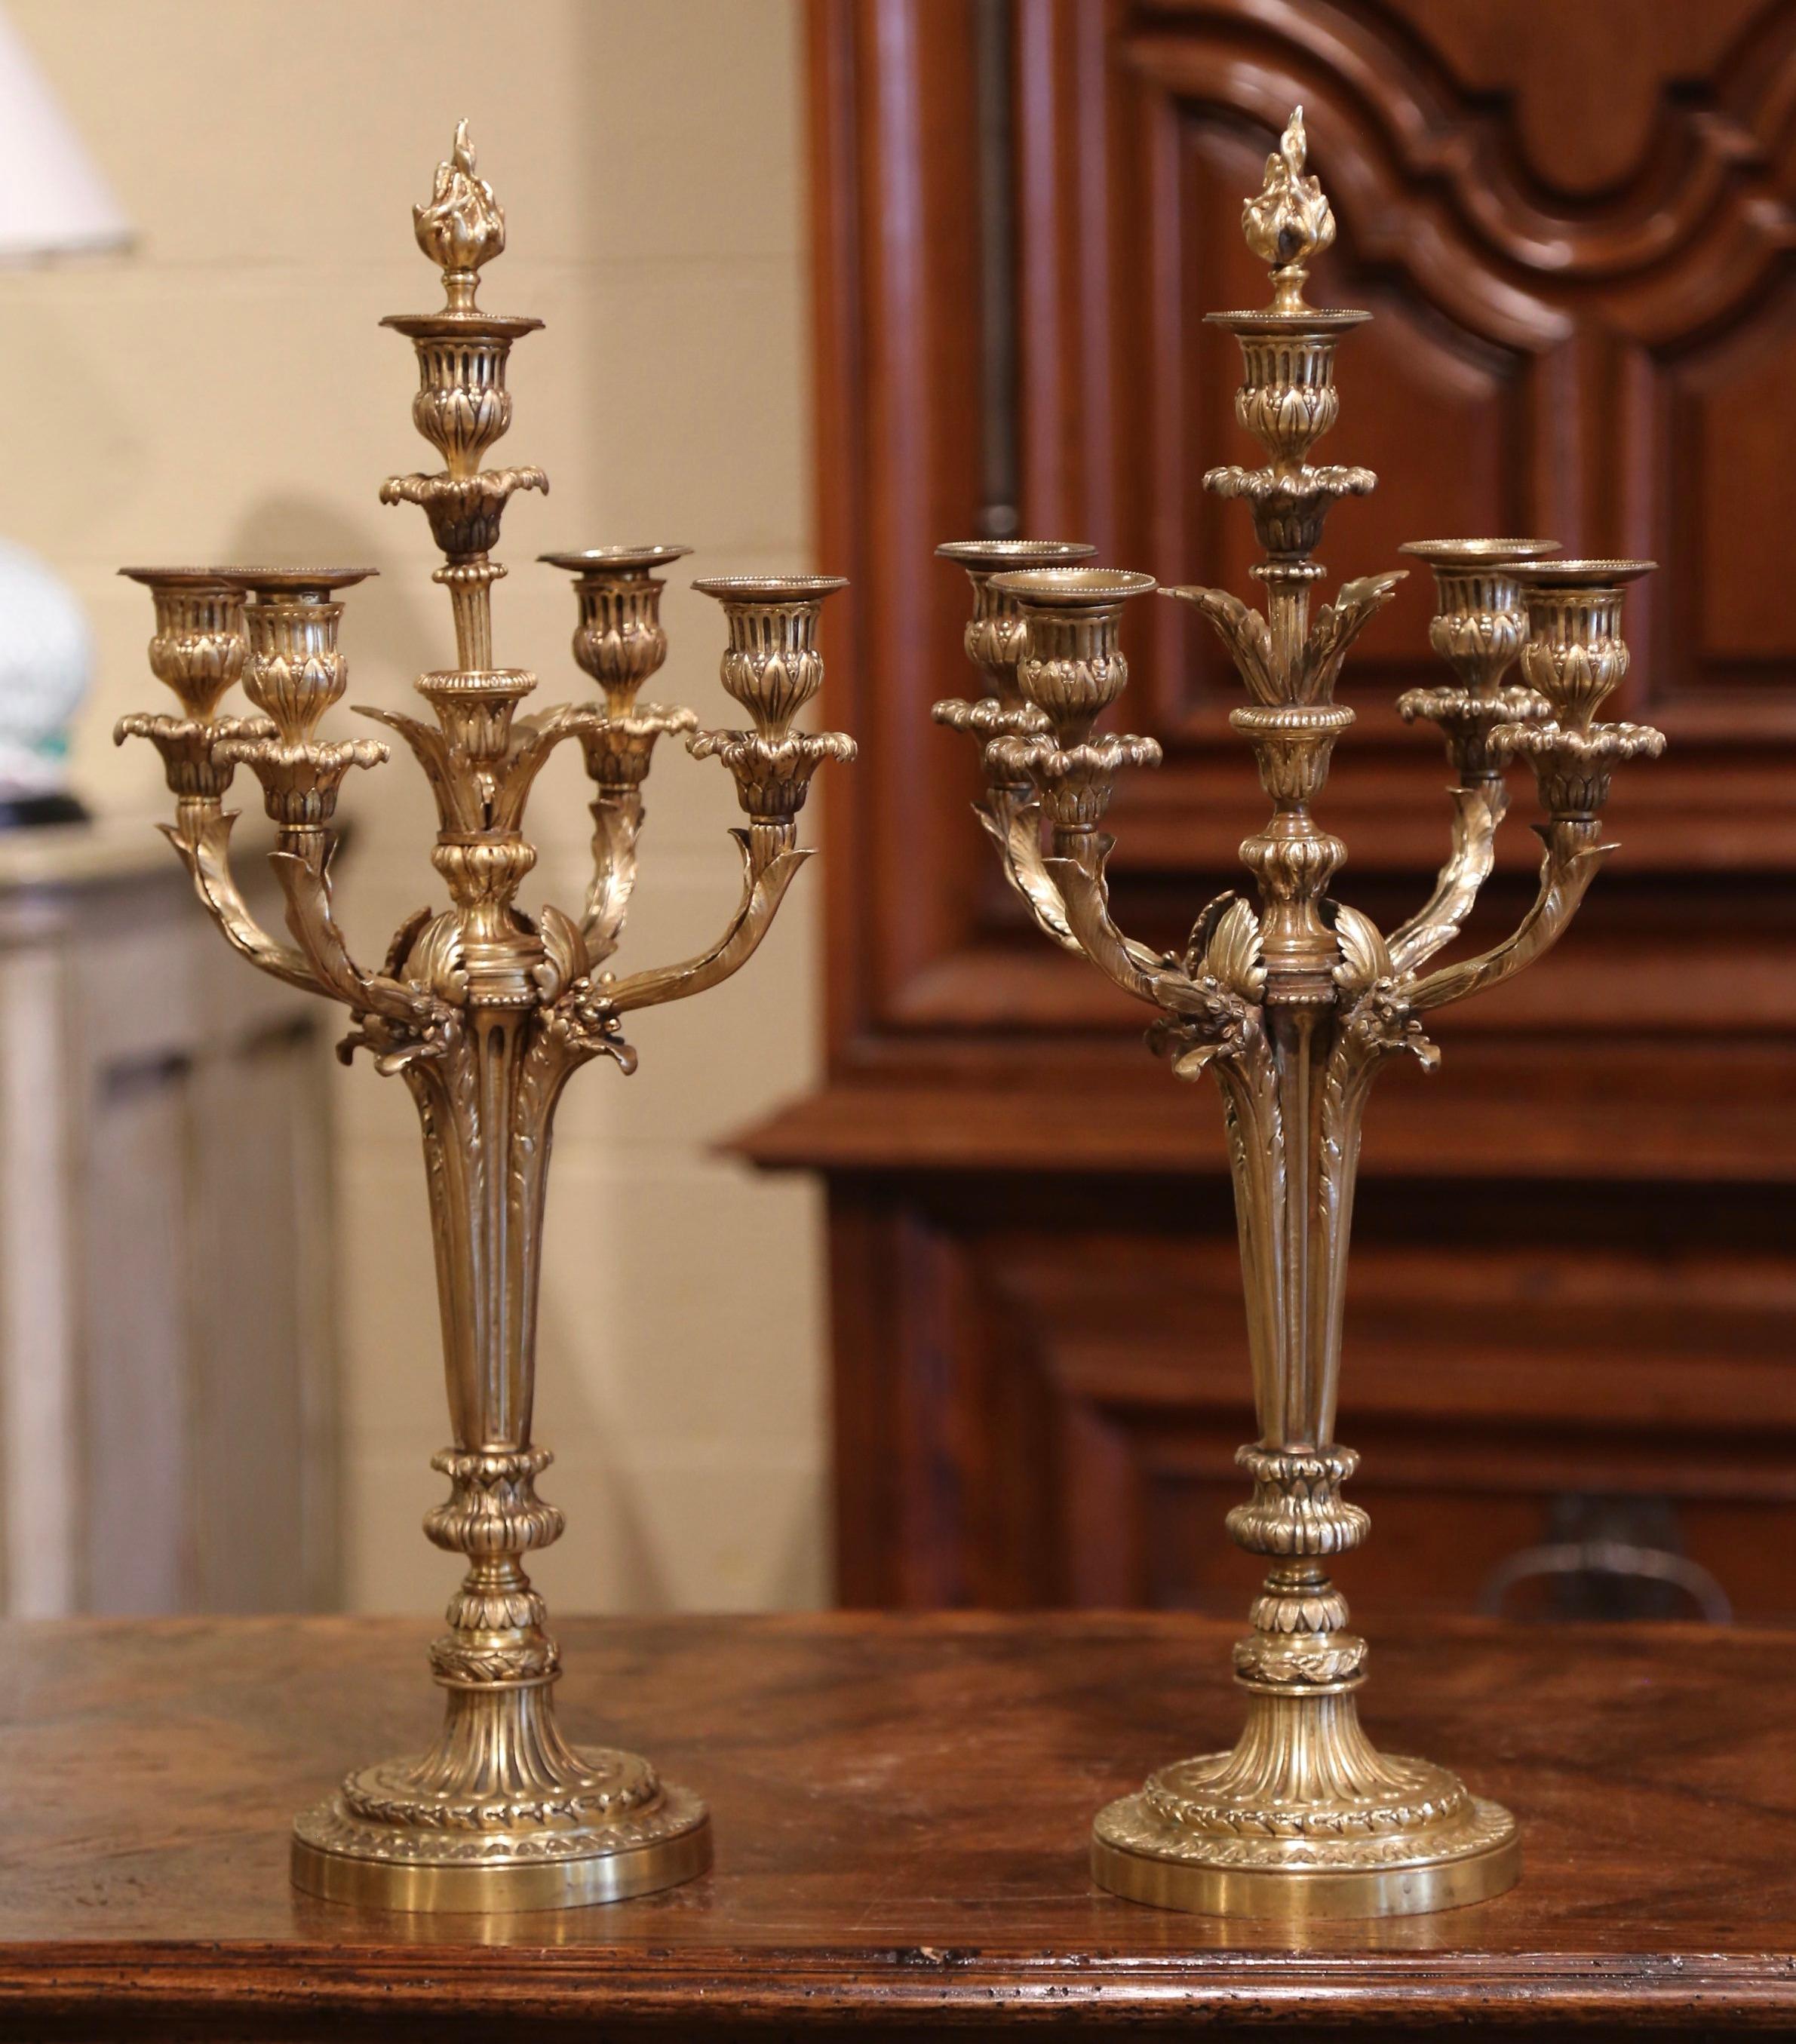 Hand-Crafted Pair of 19th Century French Louis XVI Bronze Dore Five-Arm Candelabras